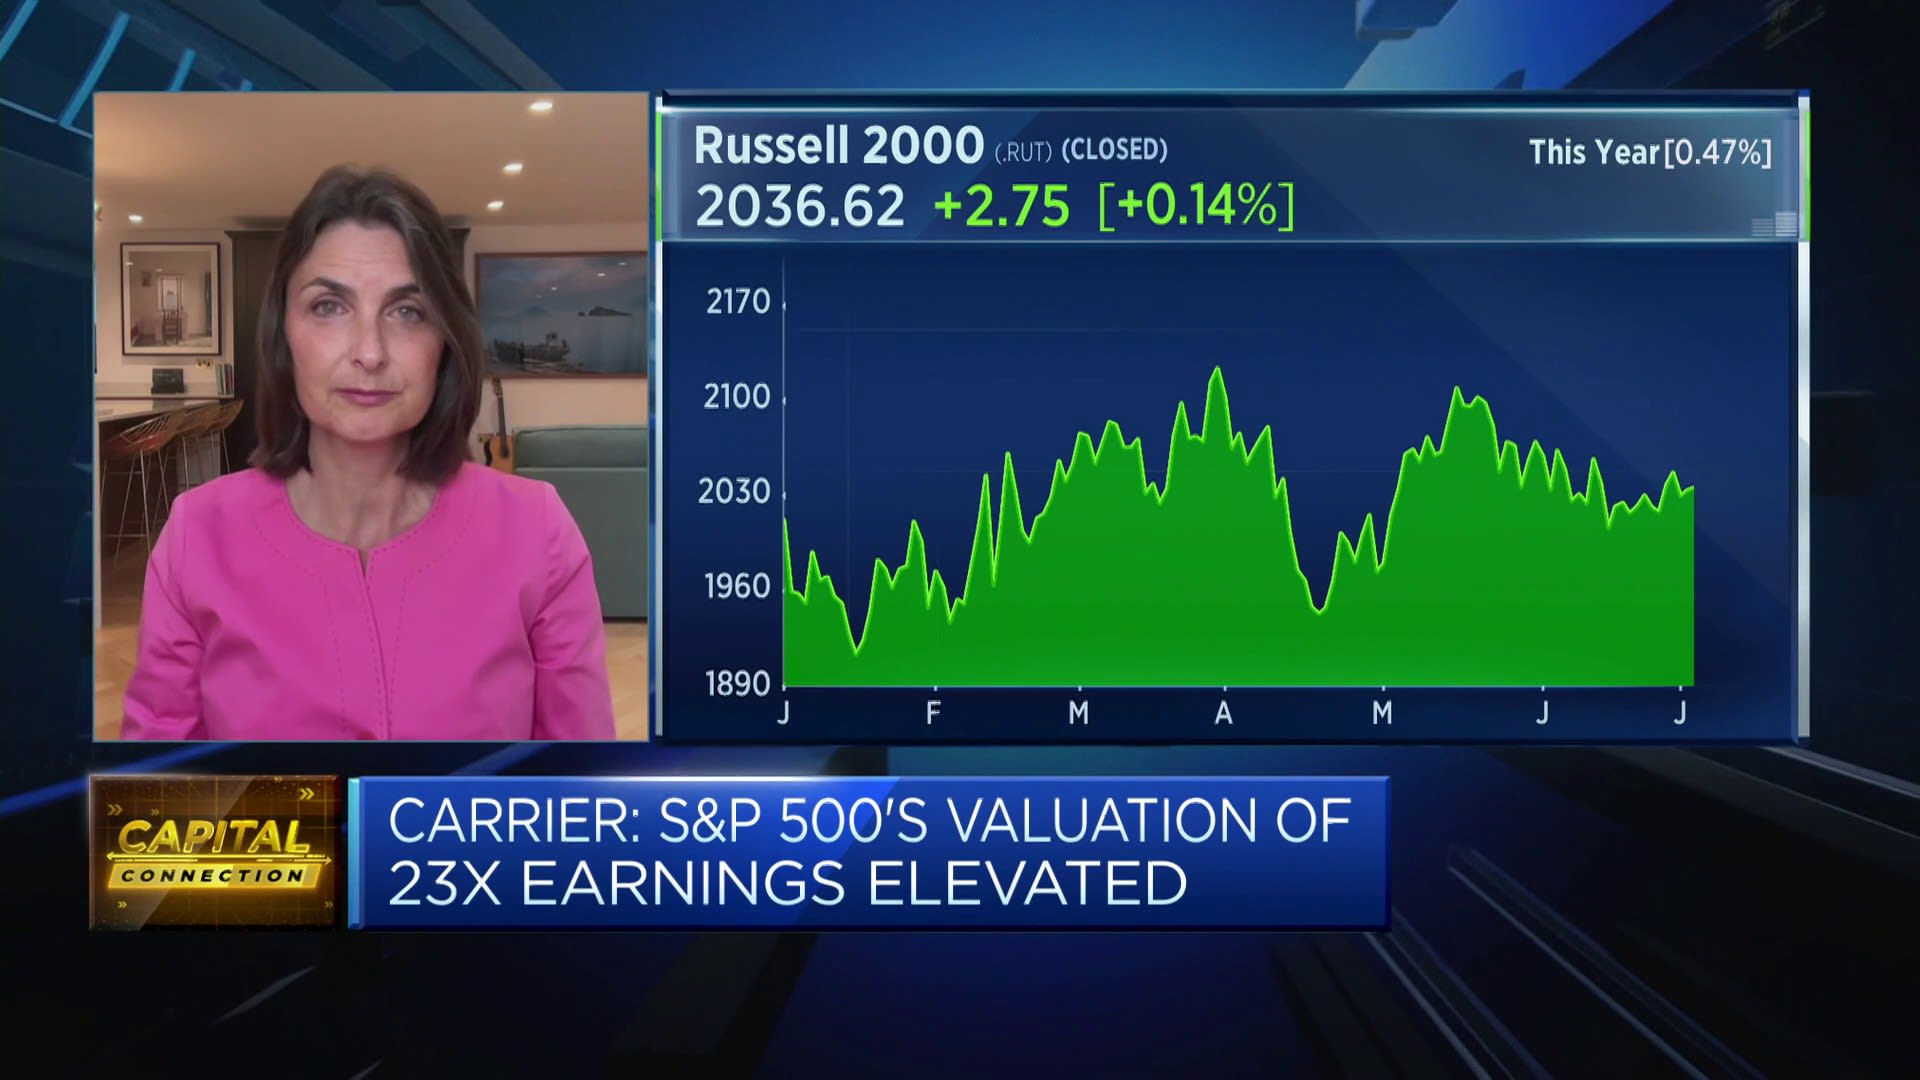 RBC Wealth Management: Too early to turn bearish on markets [Video]